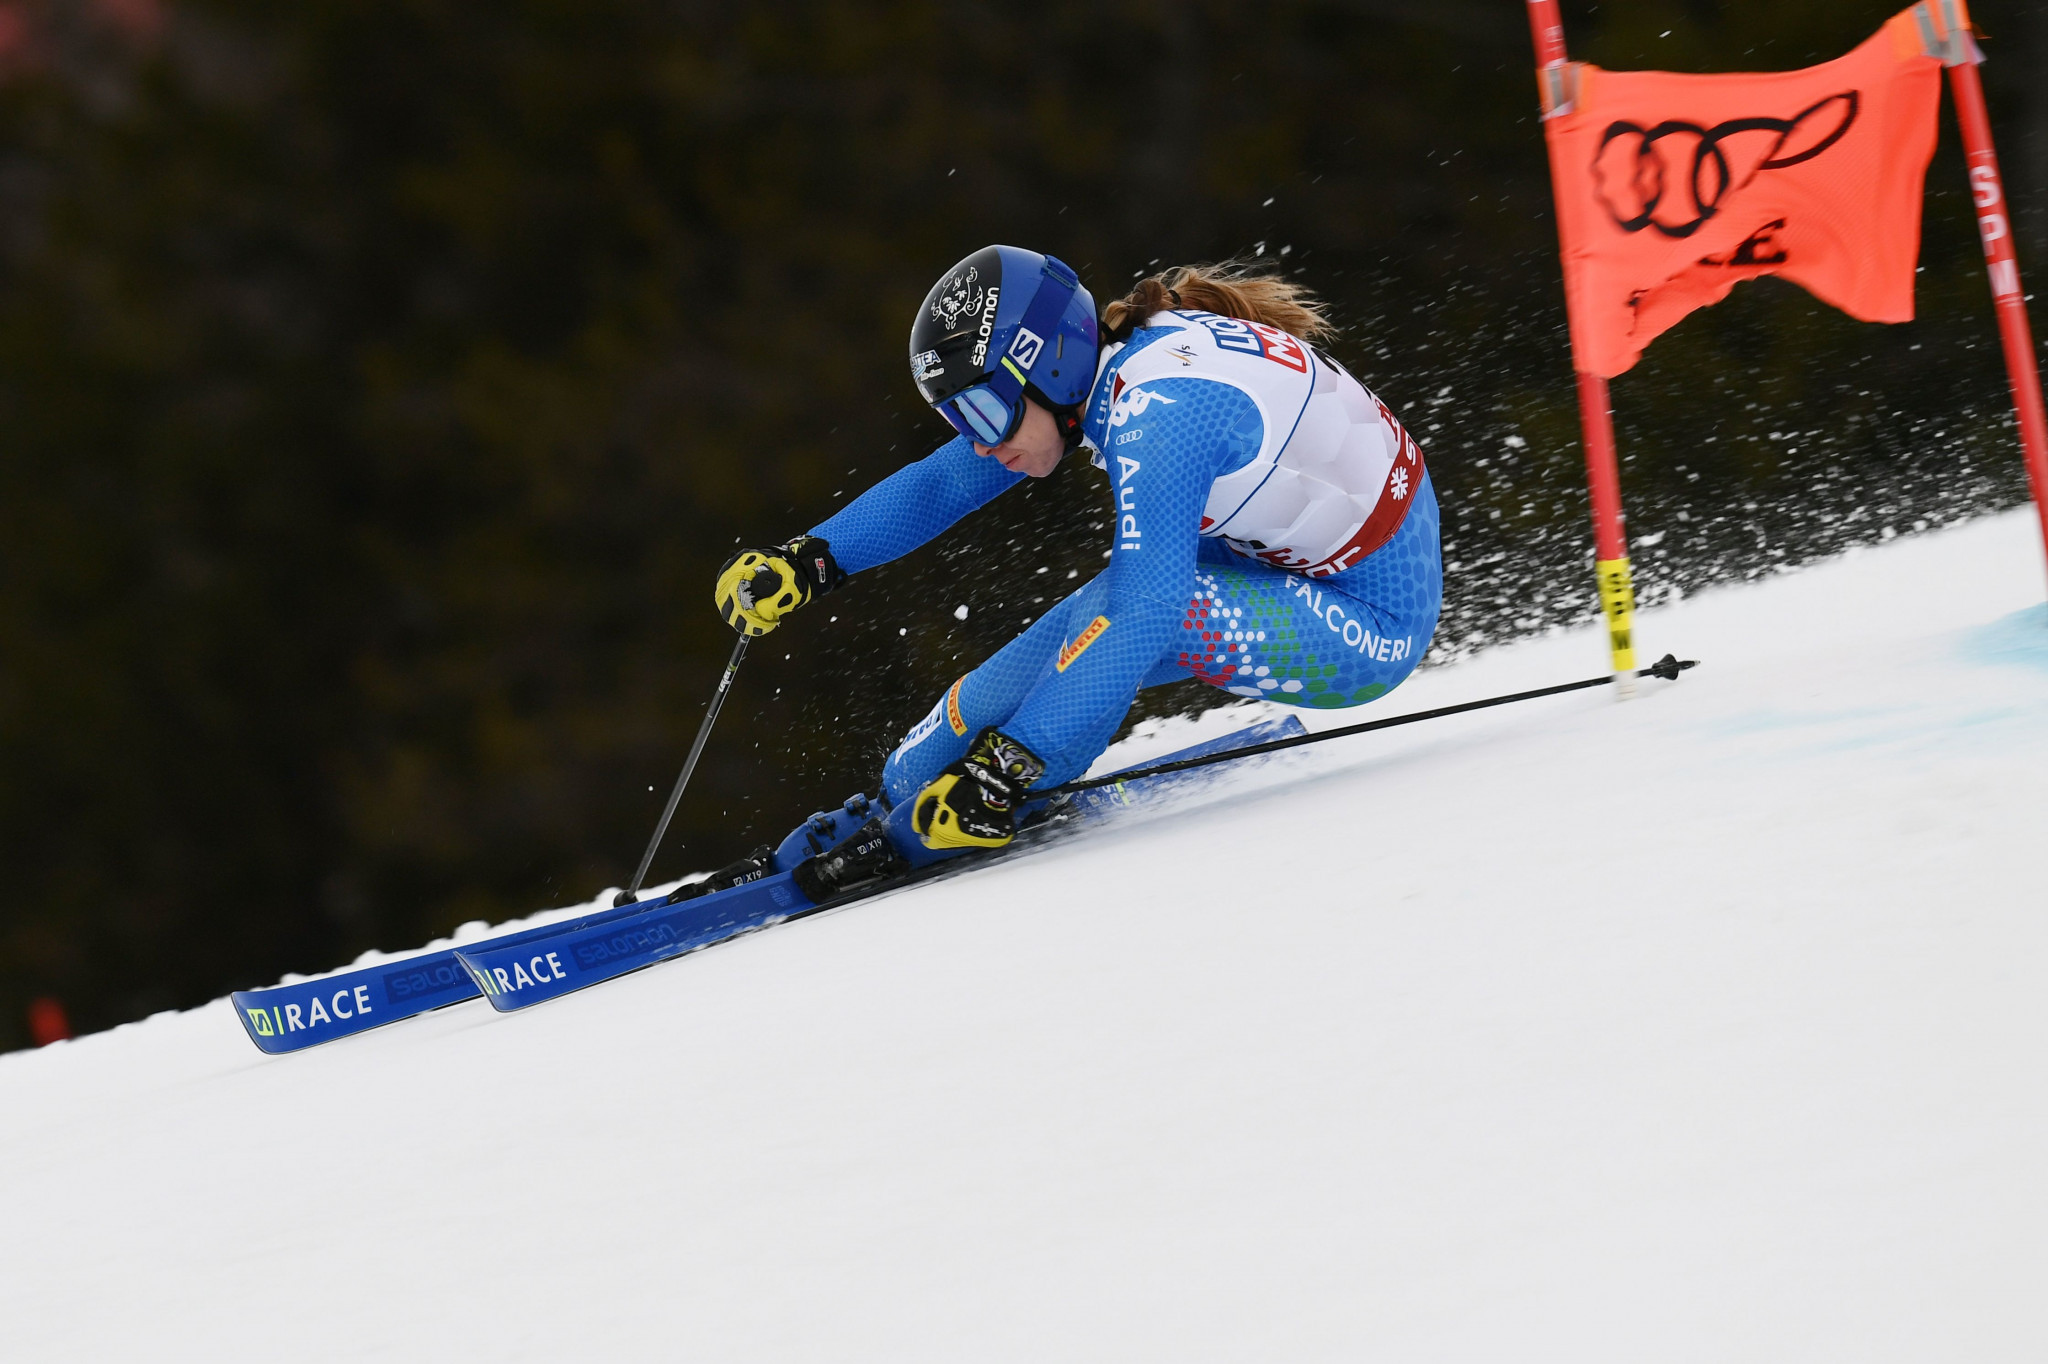 Showing just how difficult the conditions were, Francesca Marsaglia was second out of the gate for the second runs but failed to finish ©Getty Images